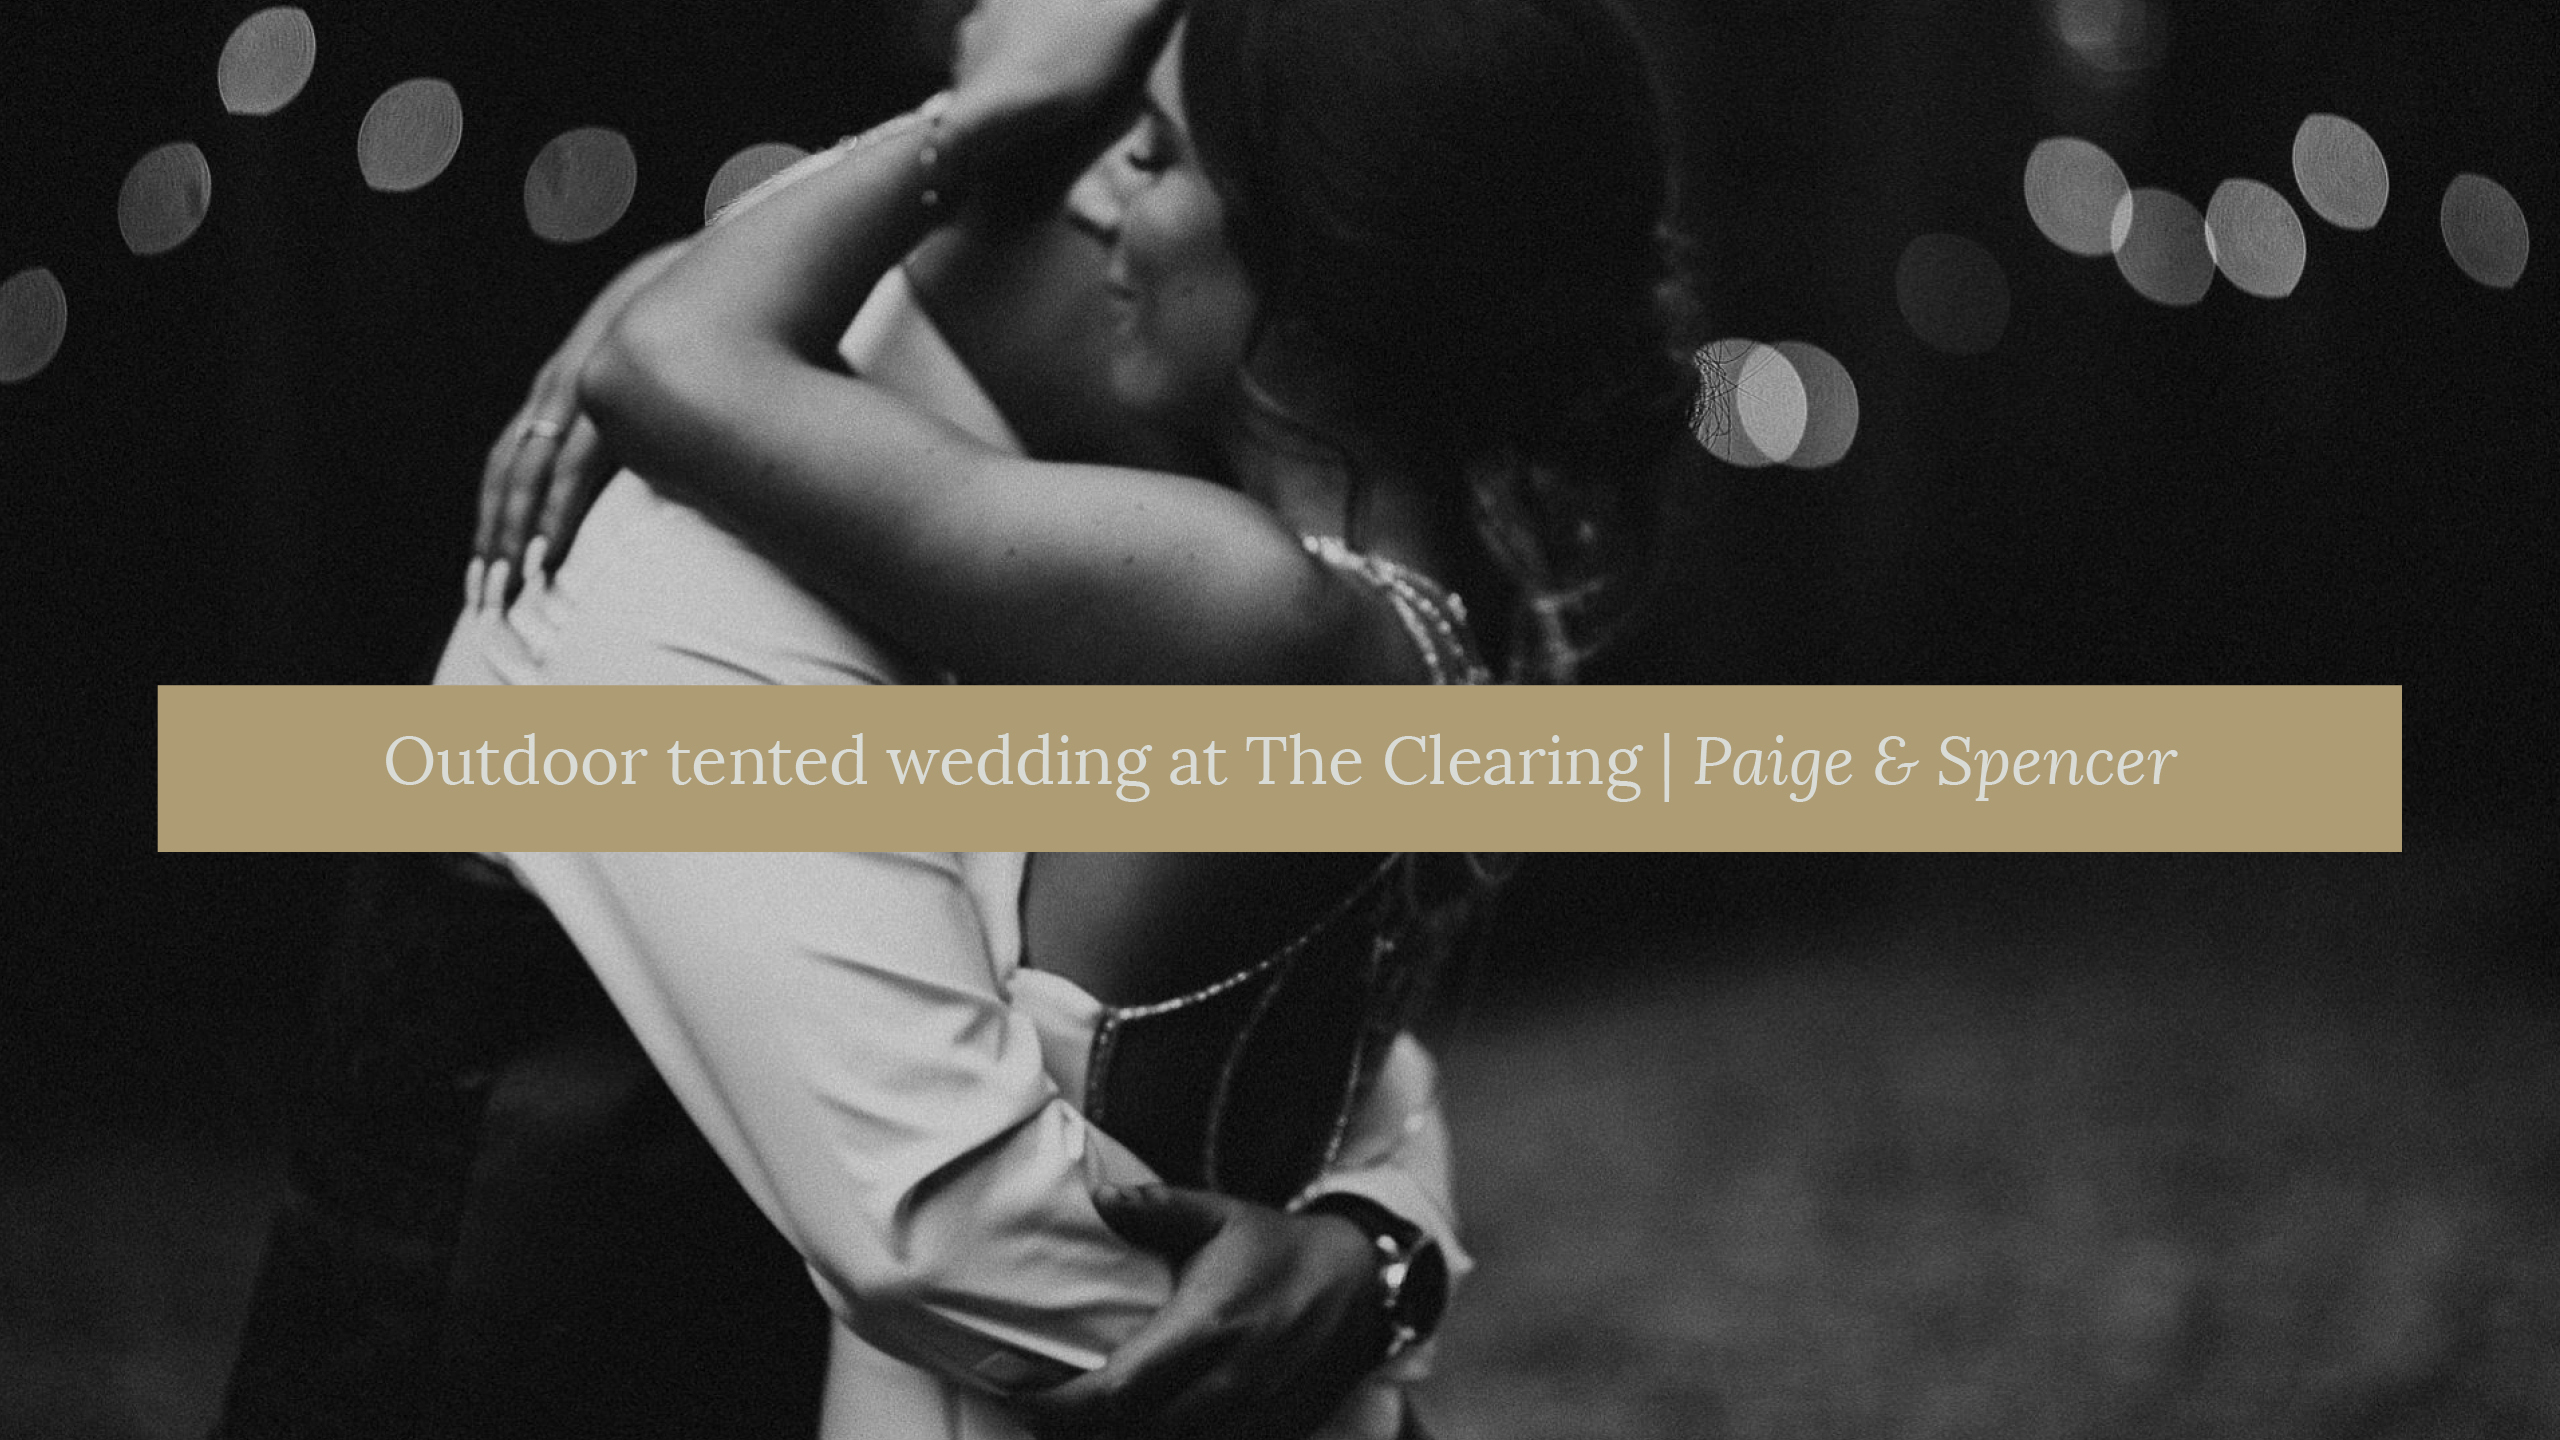 Outdoor tented wedding at the clearing wedding venue cover photo